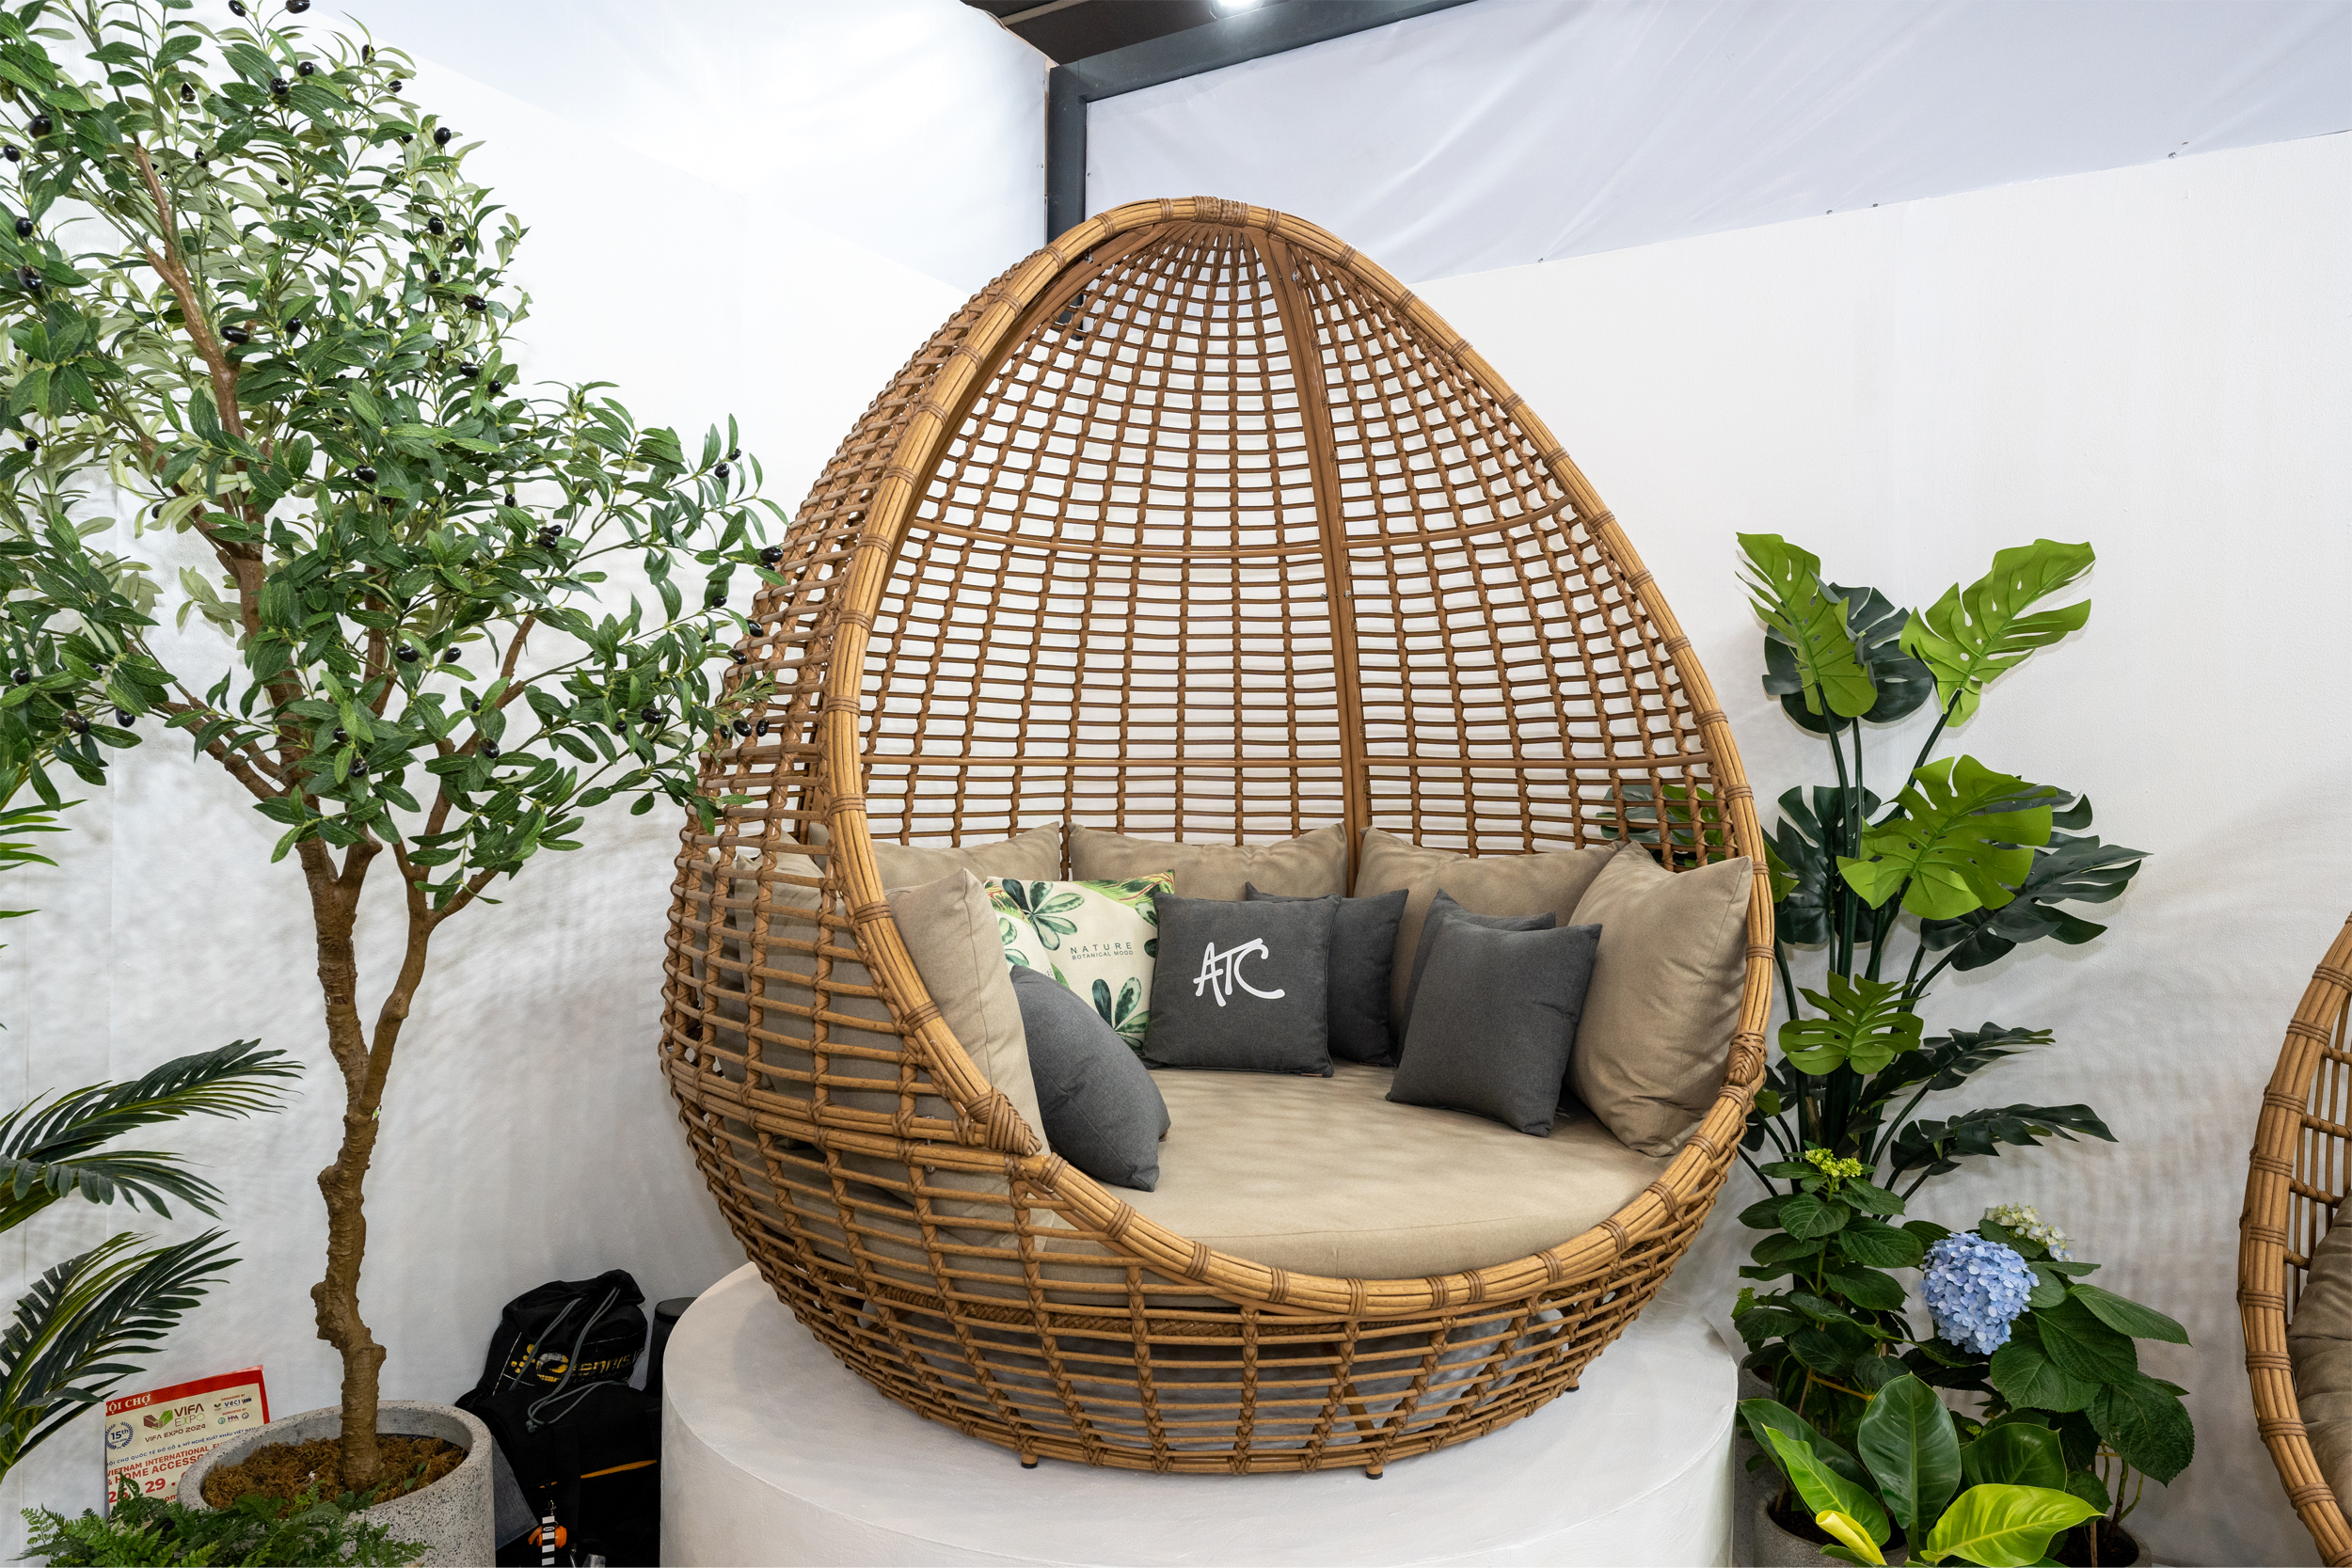 Cocoon sun loungers at ATC Furniture's booth